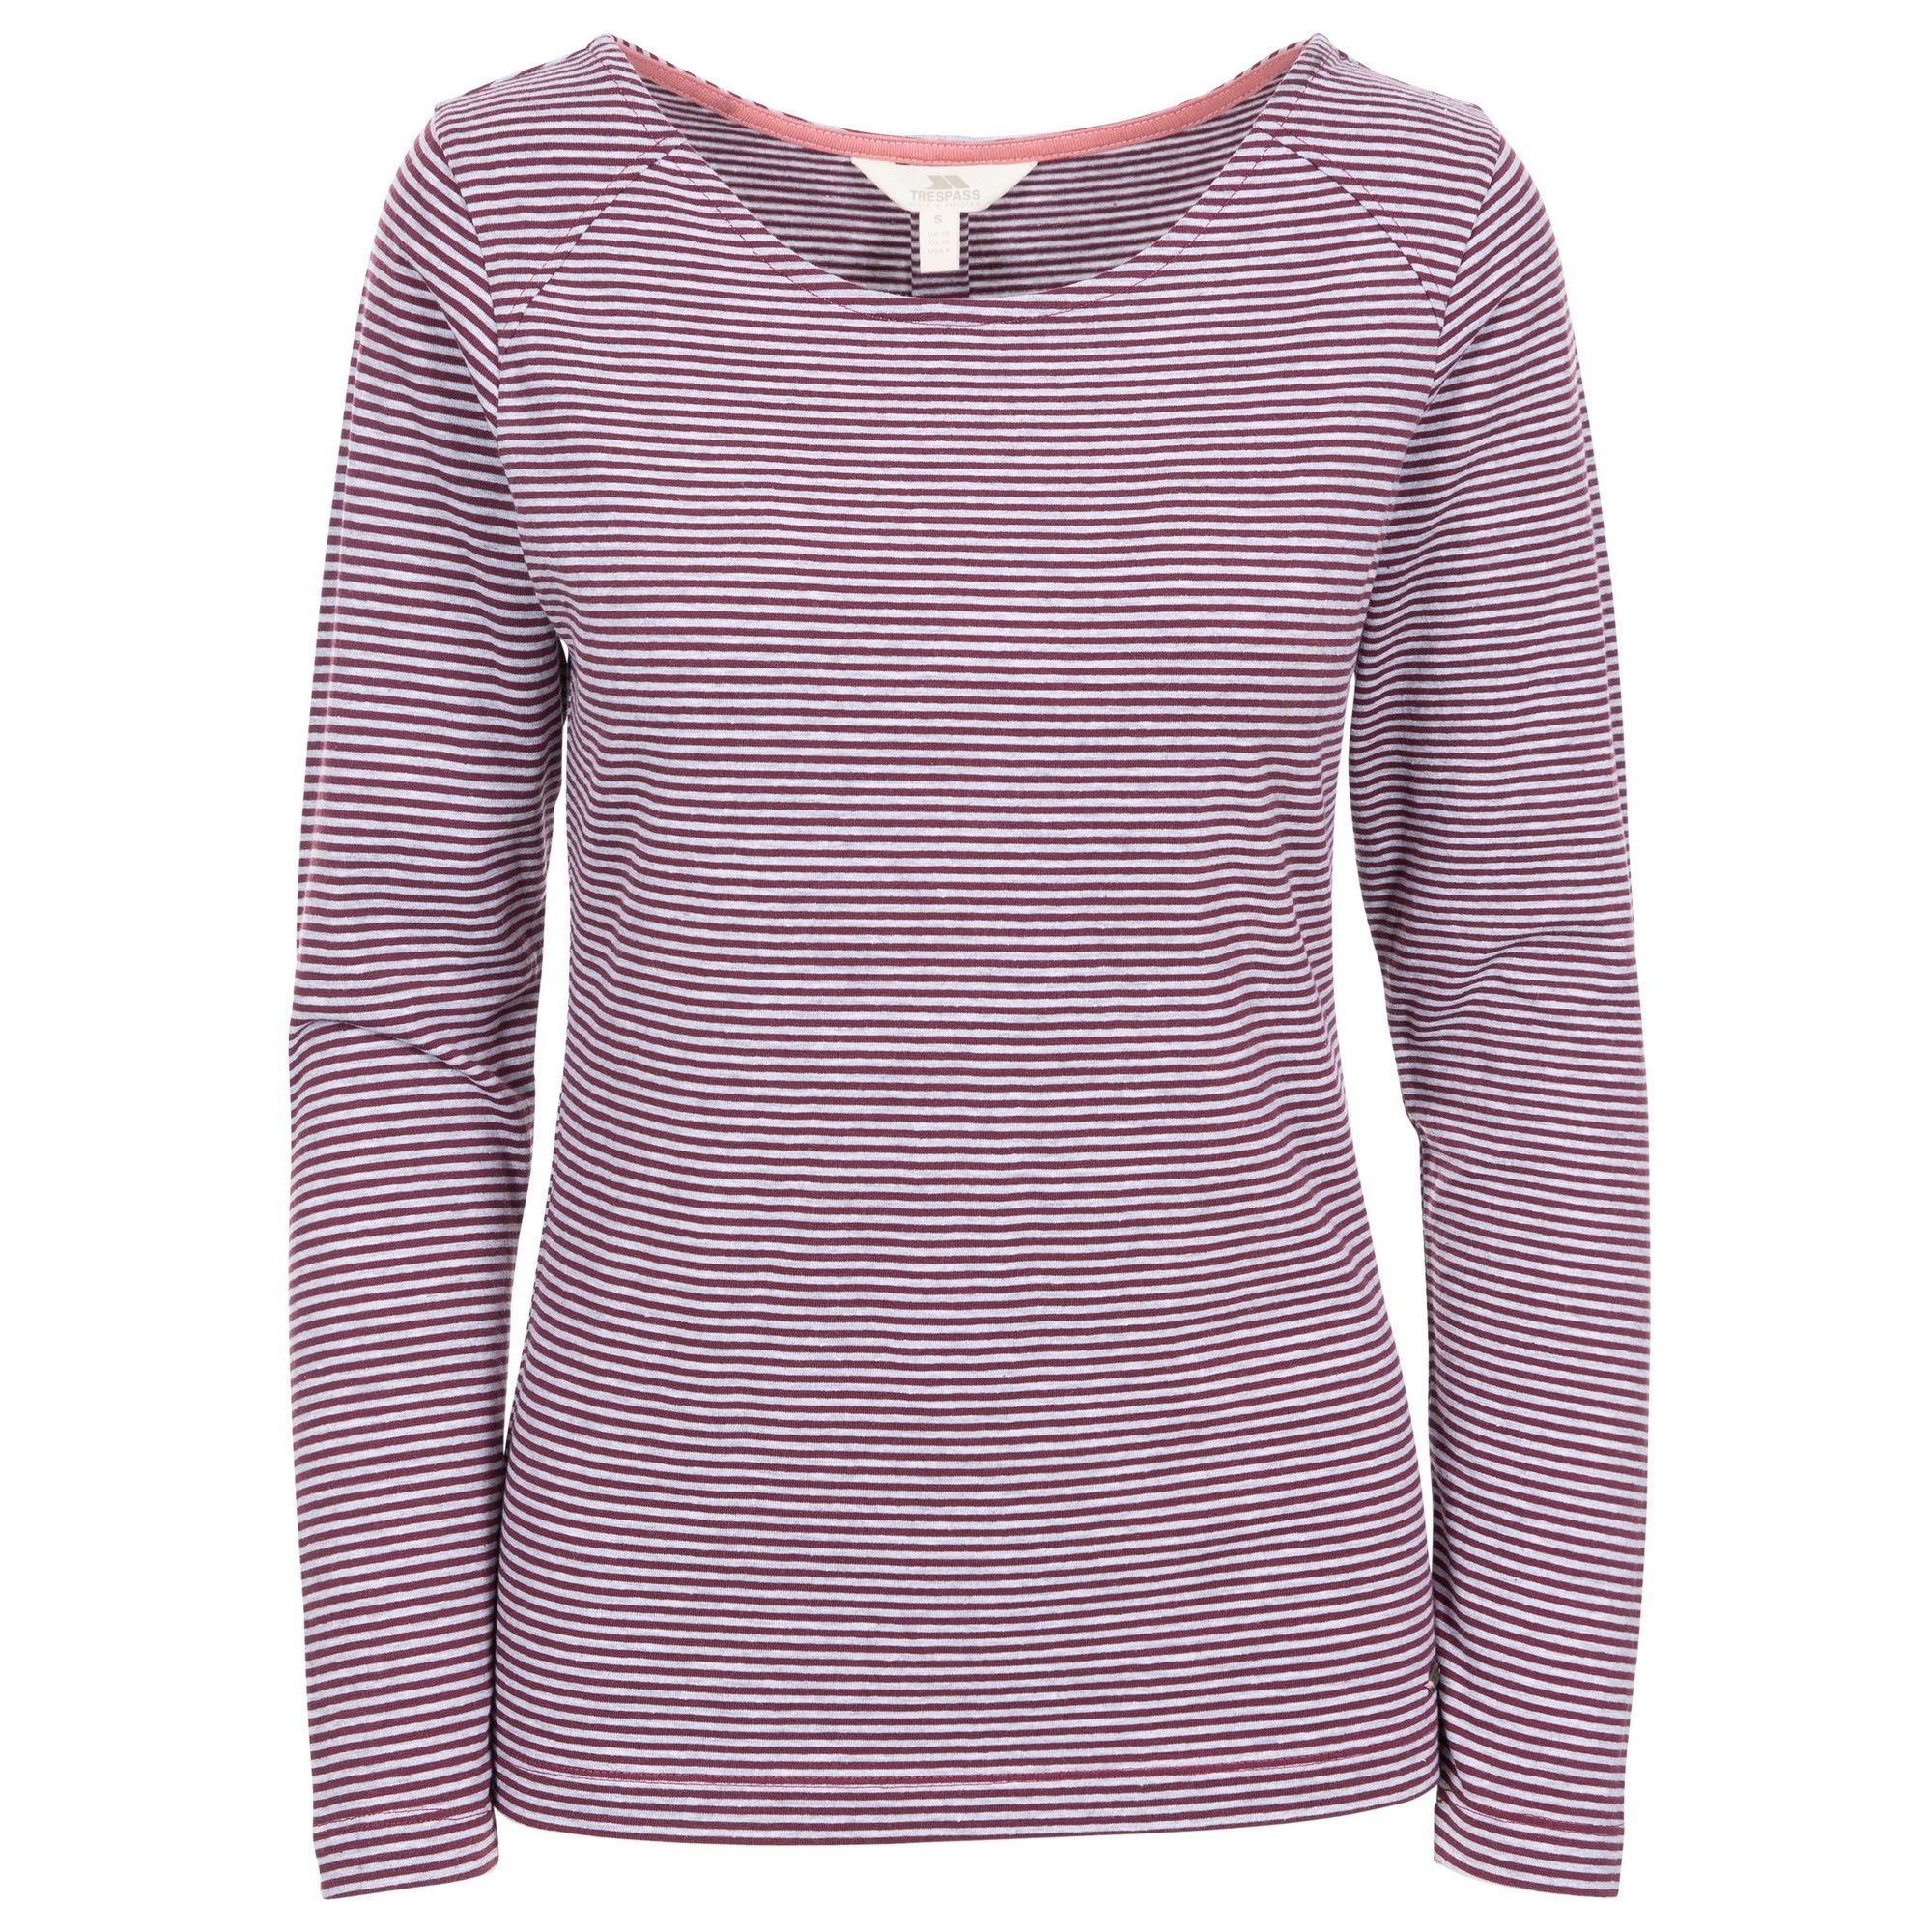 Yarn dyed stripe top. Wide neck. Contrast inner neck binding. Pleat detail at back. 95% Cotton, 5% Elastane. Trespass Womens Chest Sizing (approx): XS/8 - 32in/81cm, S/10 - 34in/86cm, M/12 - 36in/91.4cm, L/14 - 38in/96.5cm, XL/16 - 40in/101.5cm, XXL/18 - 42in/106.5cm.